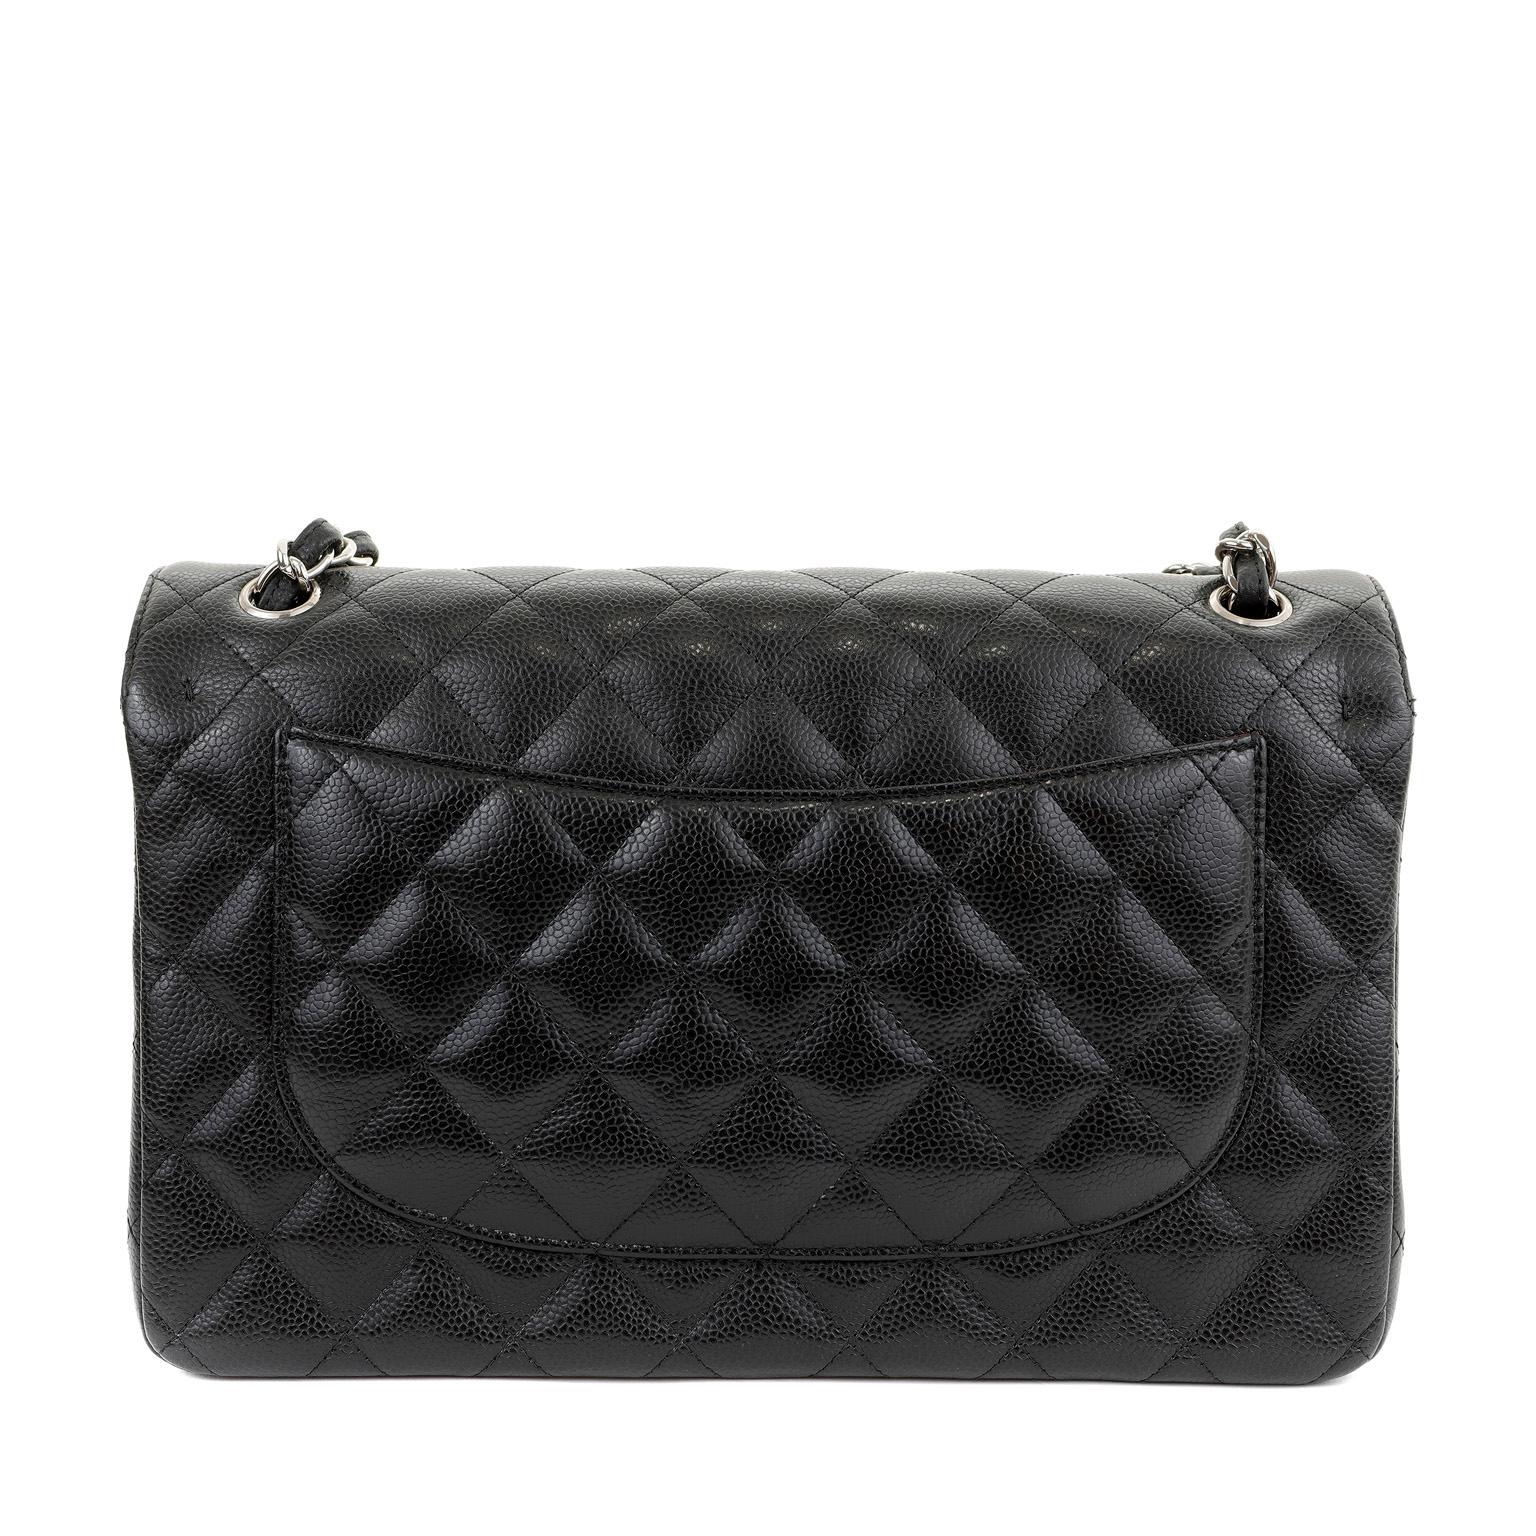 Women's Chanel Black Caviar Jumbo Classic Flap Bag with Silver Hardware For Sale